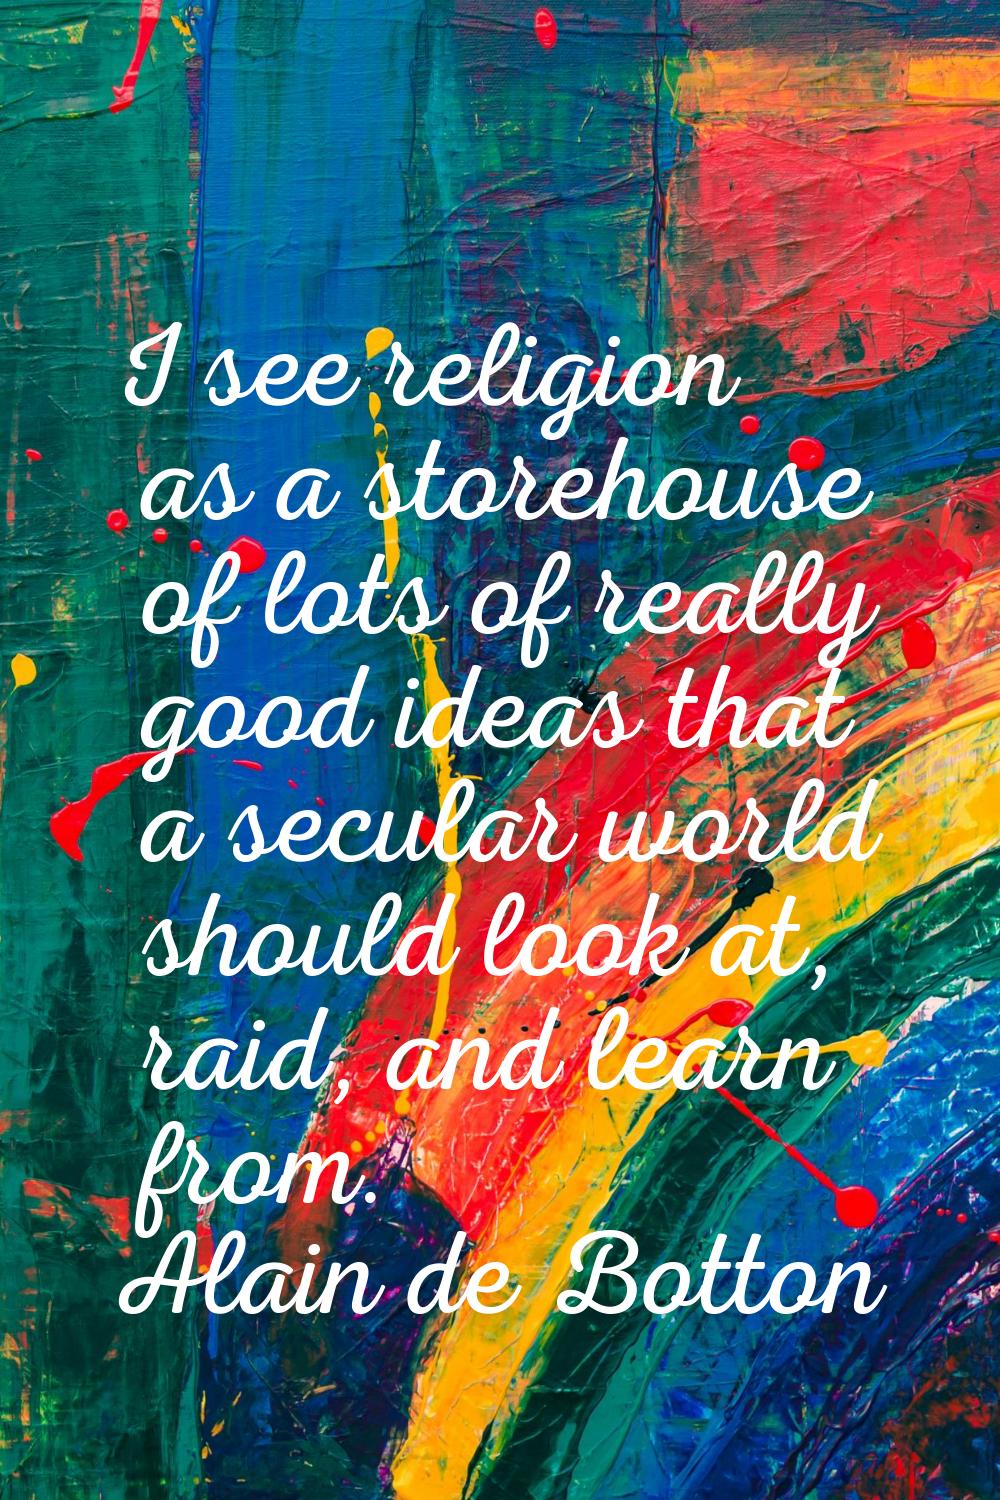 I see religion as a storehouse of lots of really good ideas that a secular world should look at, ra